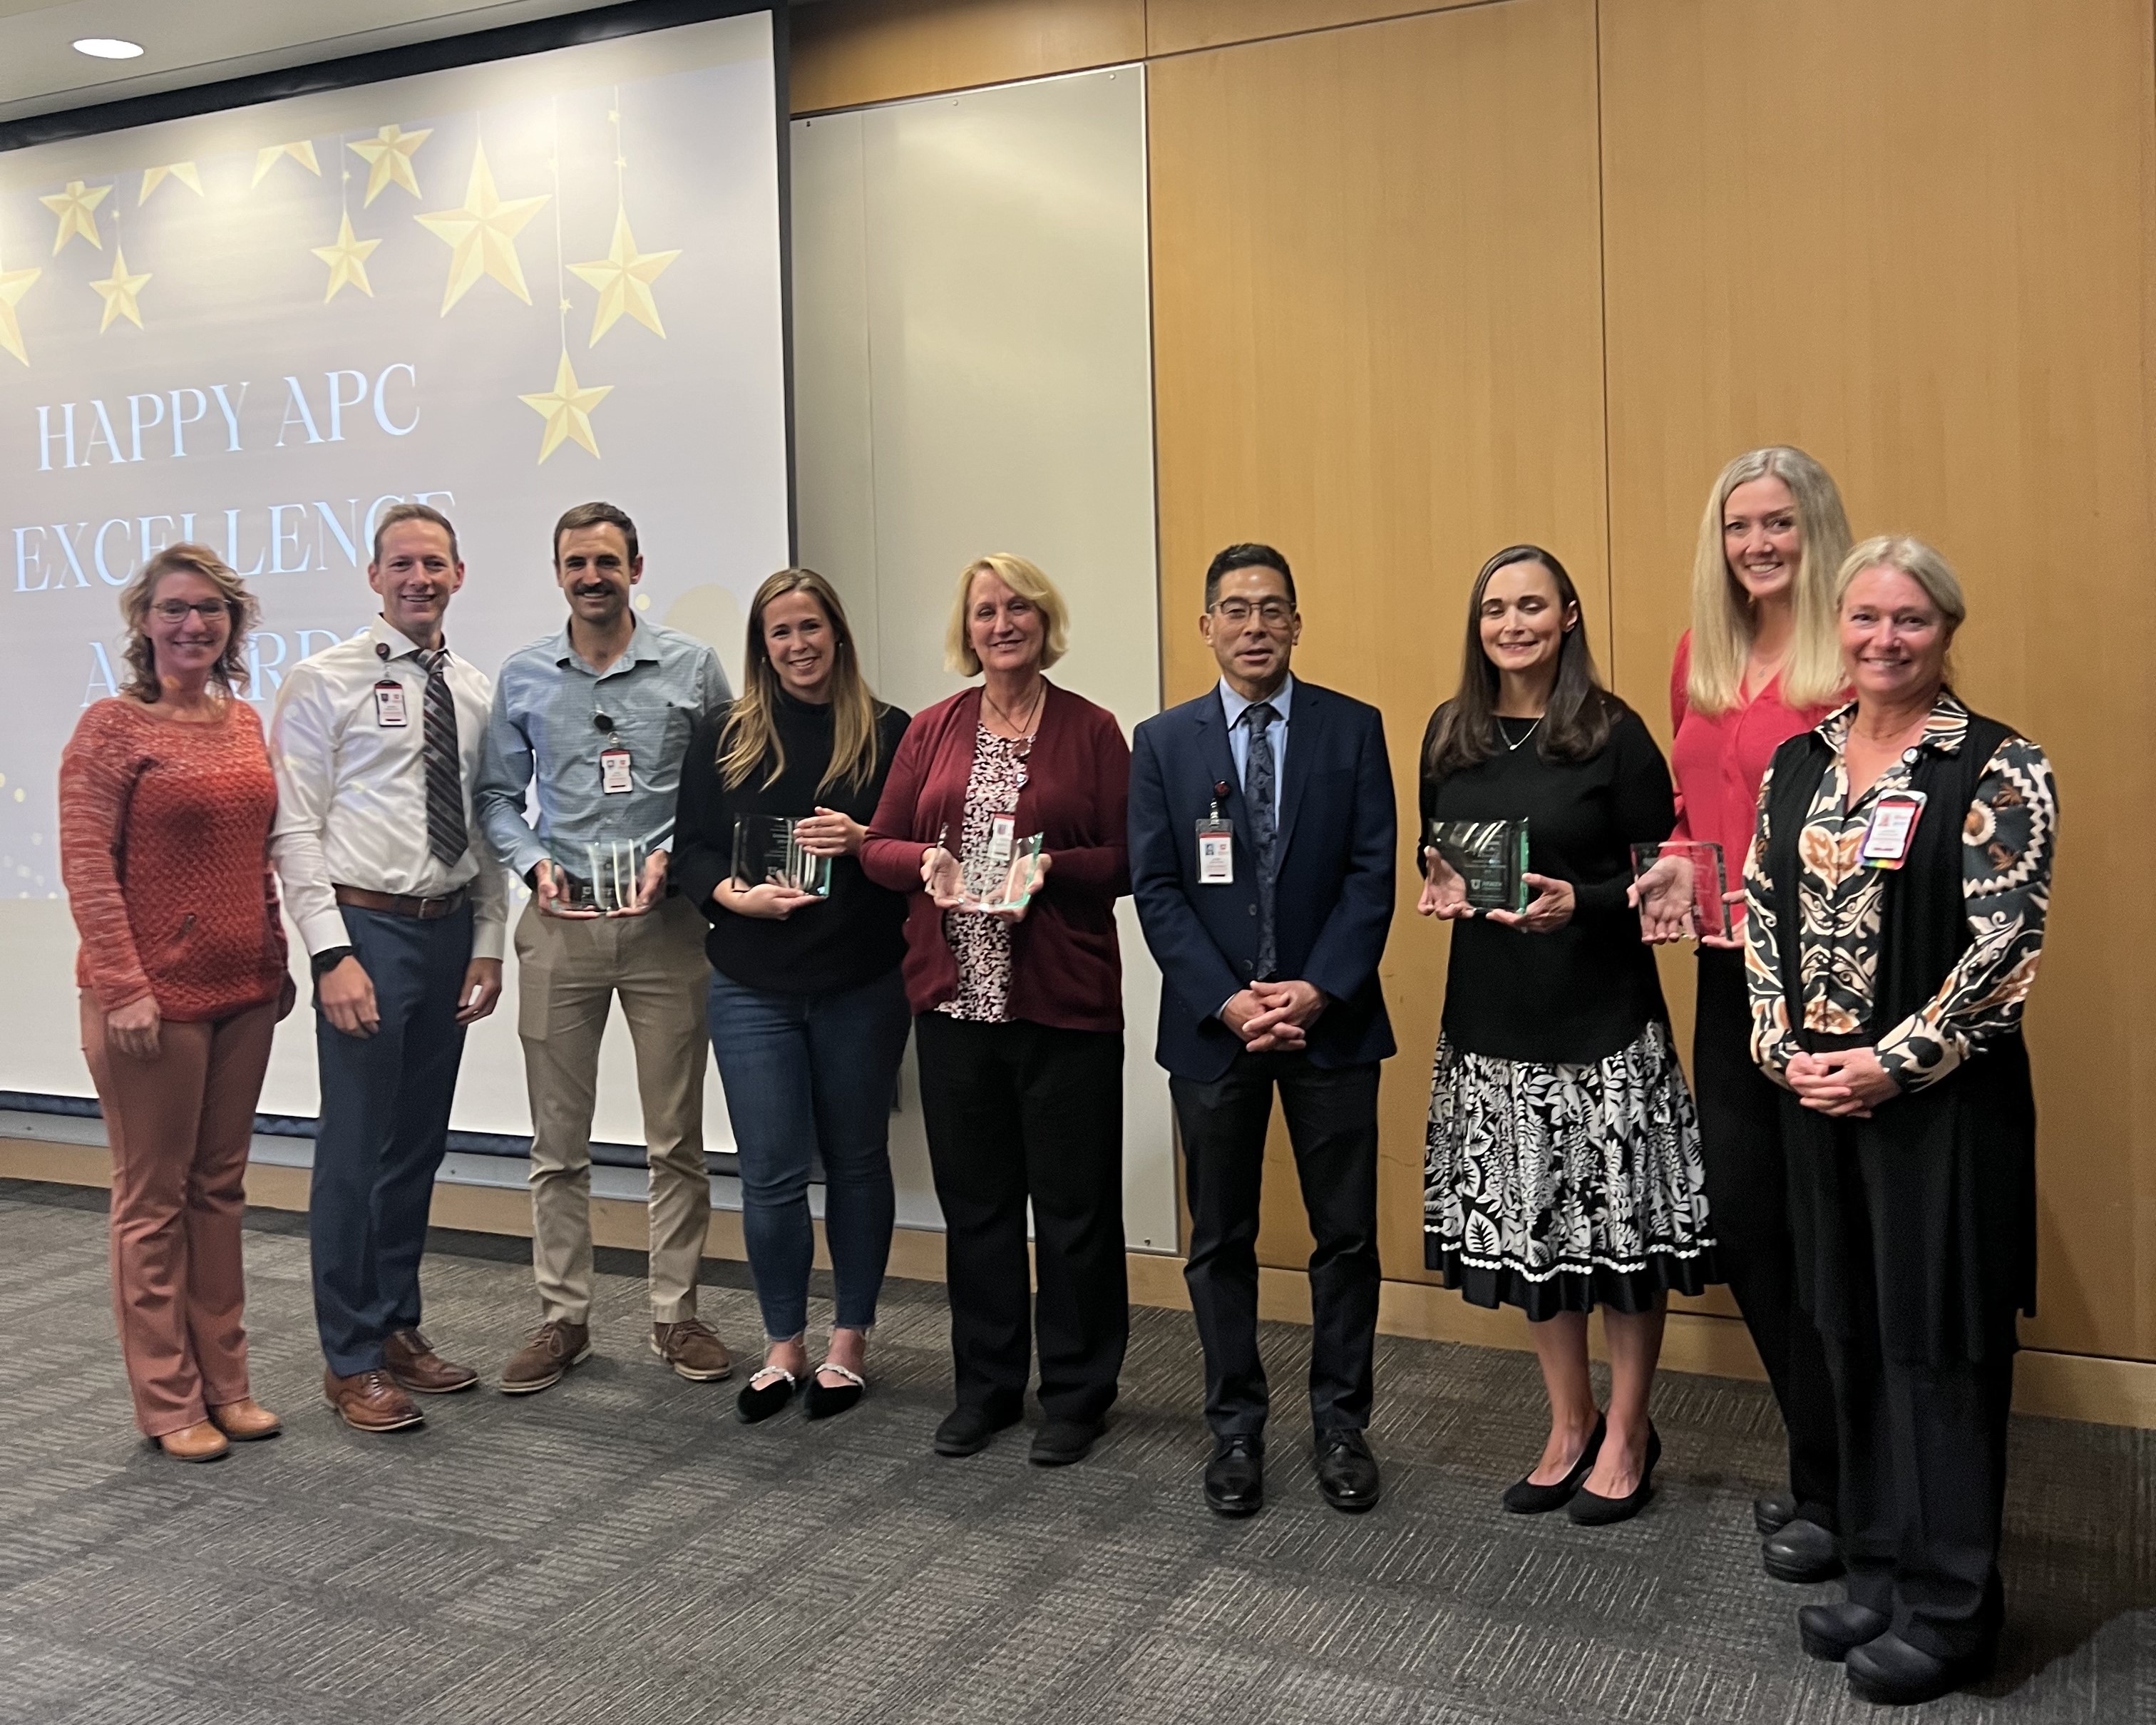 APC Winners with Dr. Inadomi, Brighton Loveday, Andrea Schindler, and David Kendrick